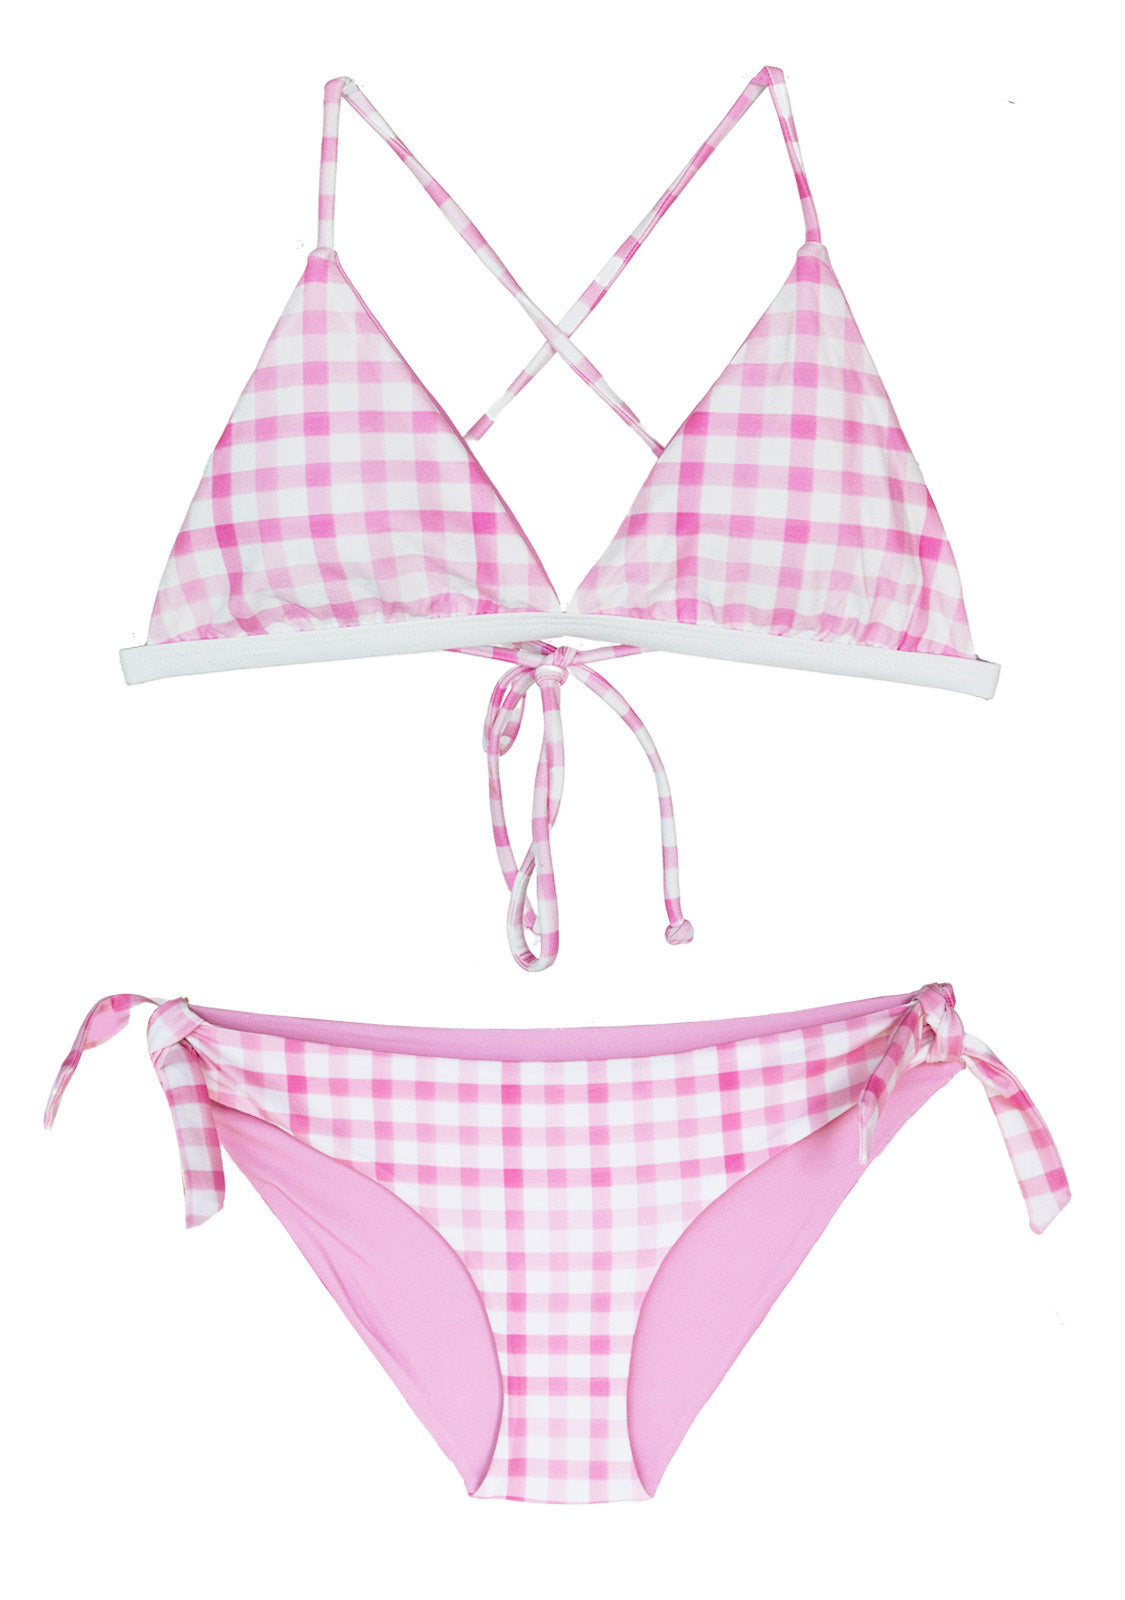 GINGHAM PINK ~ Reversible 2-Piece TRIANGLE Top + 1-Tie Bottoms